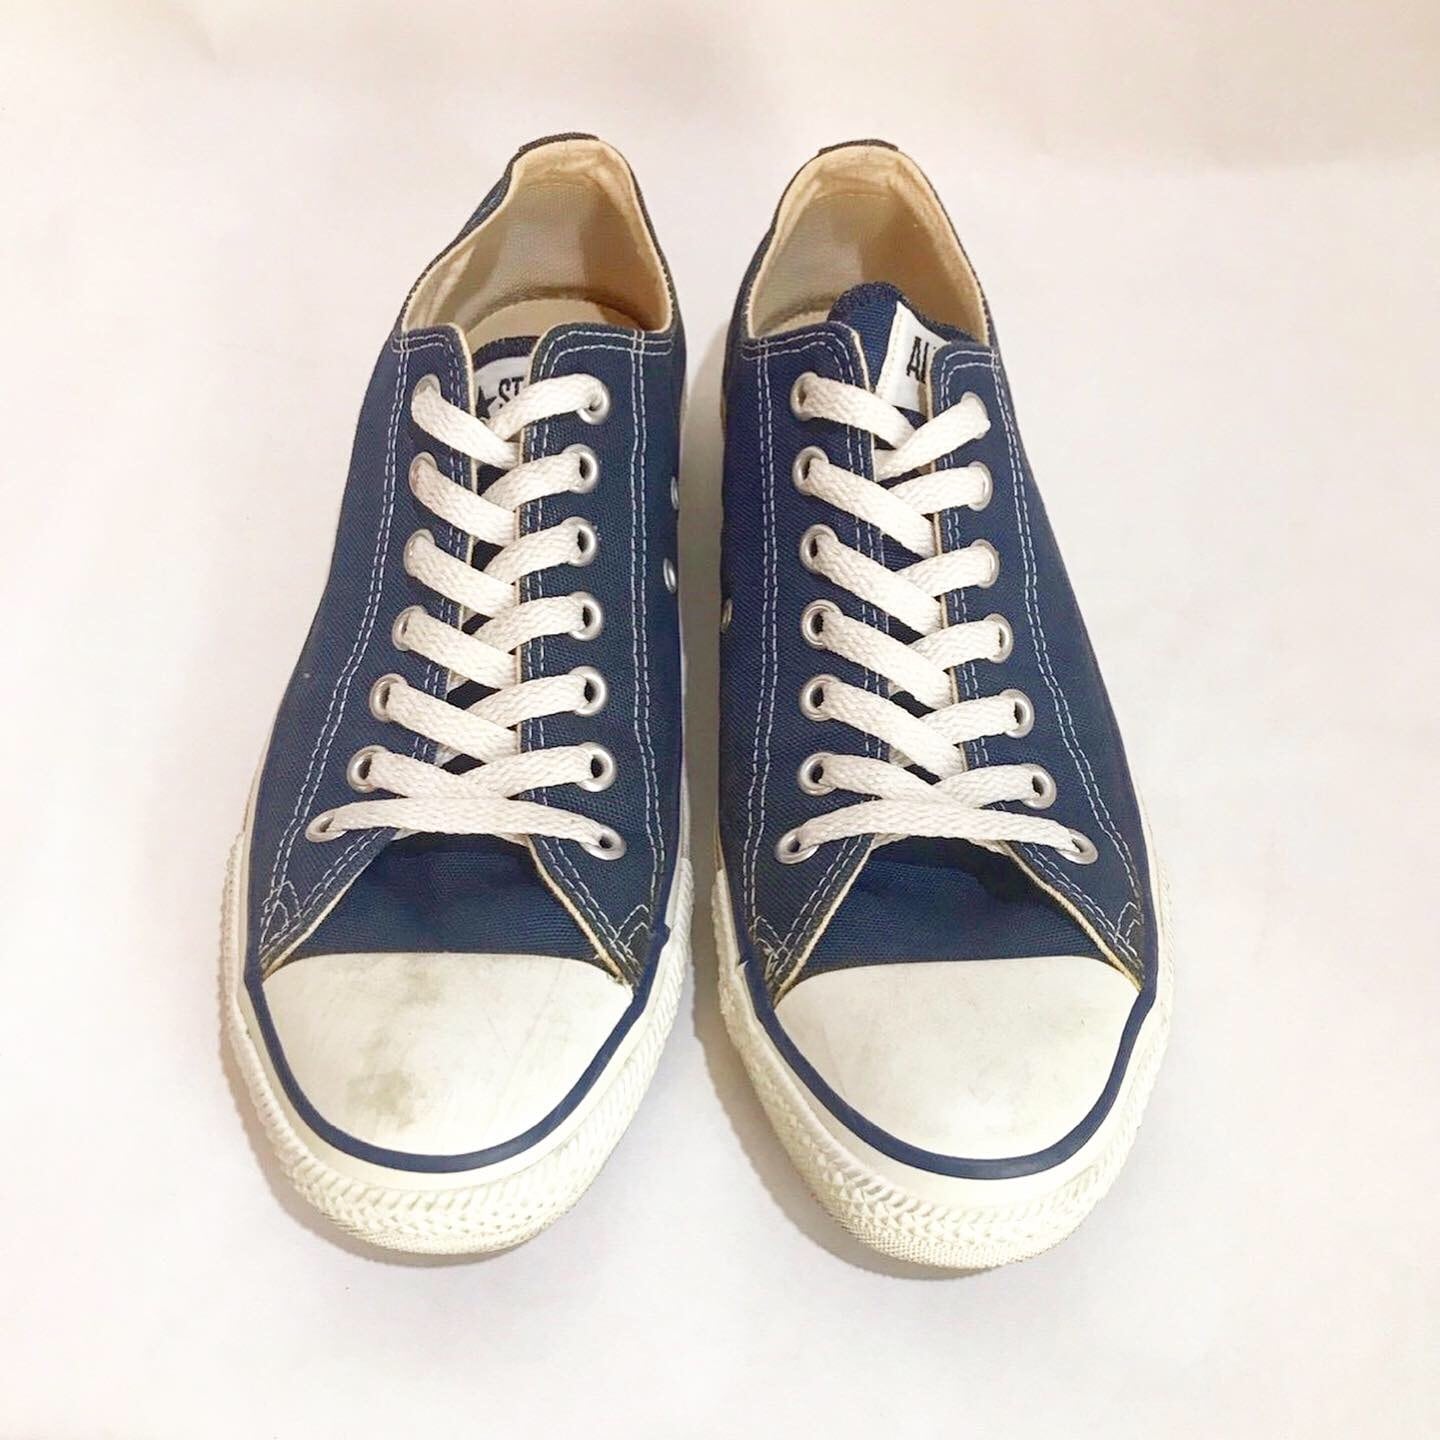 90's　CONVERSE　オールスター　made in usa　ヴィンテージ